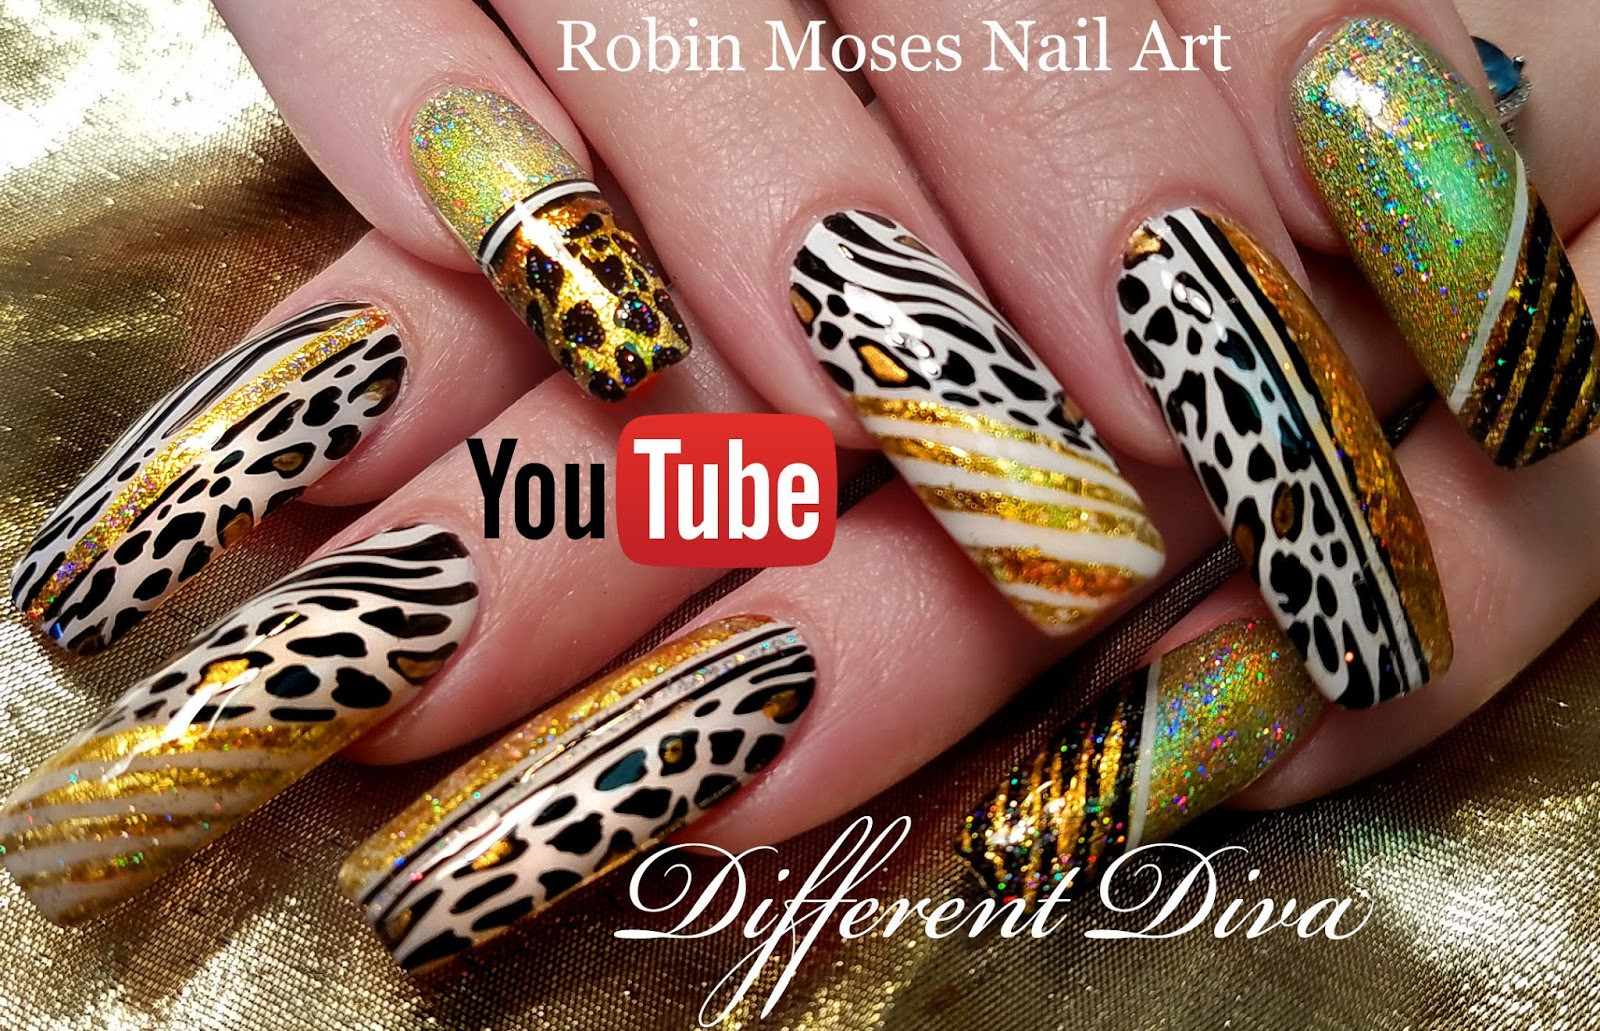 Robin Moses Nail Art Fan Page - Home - wide 7